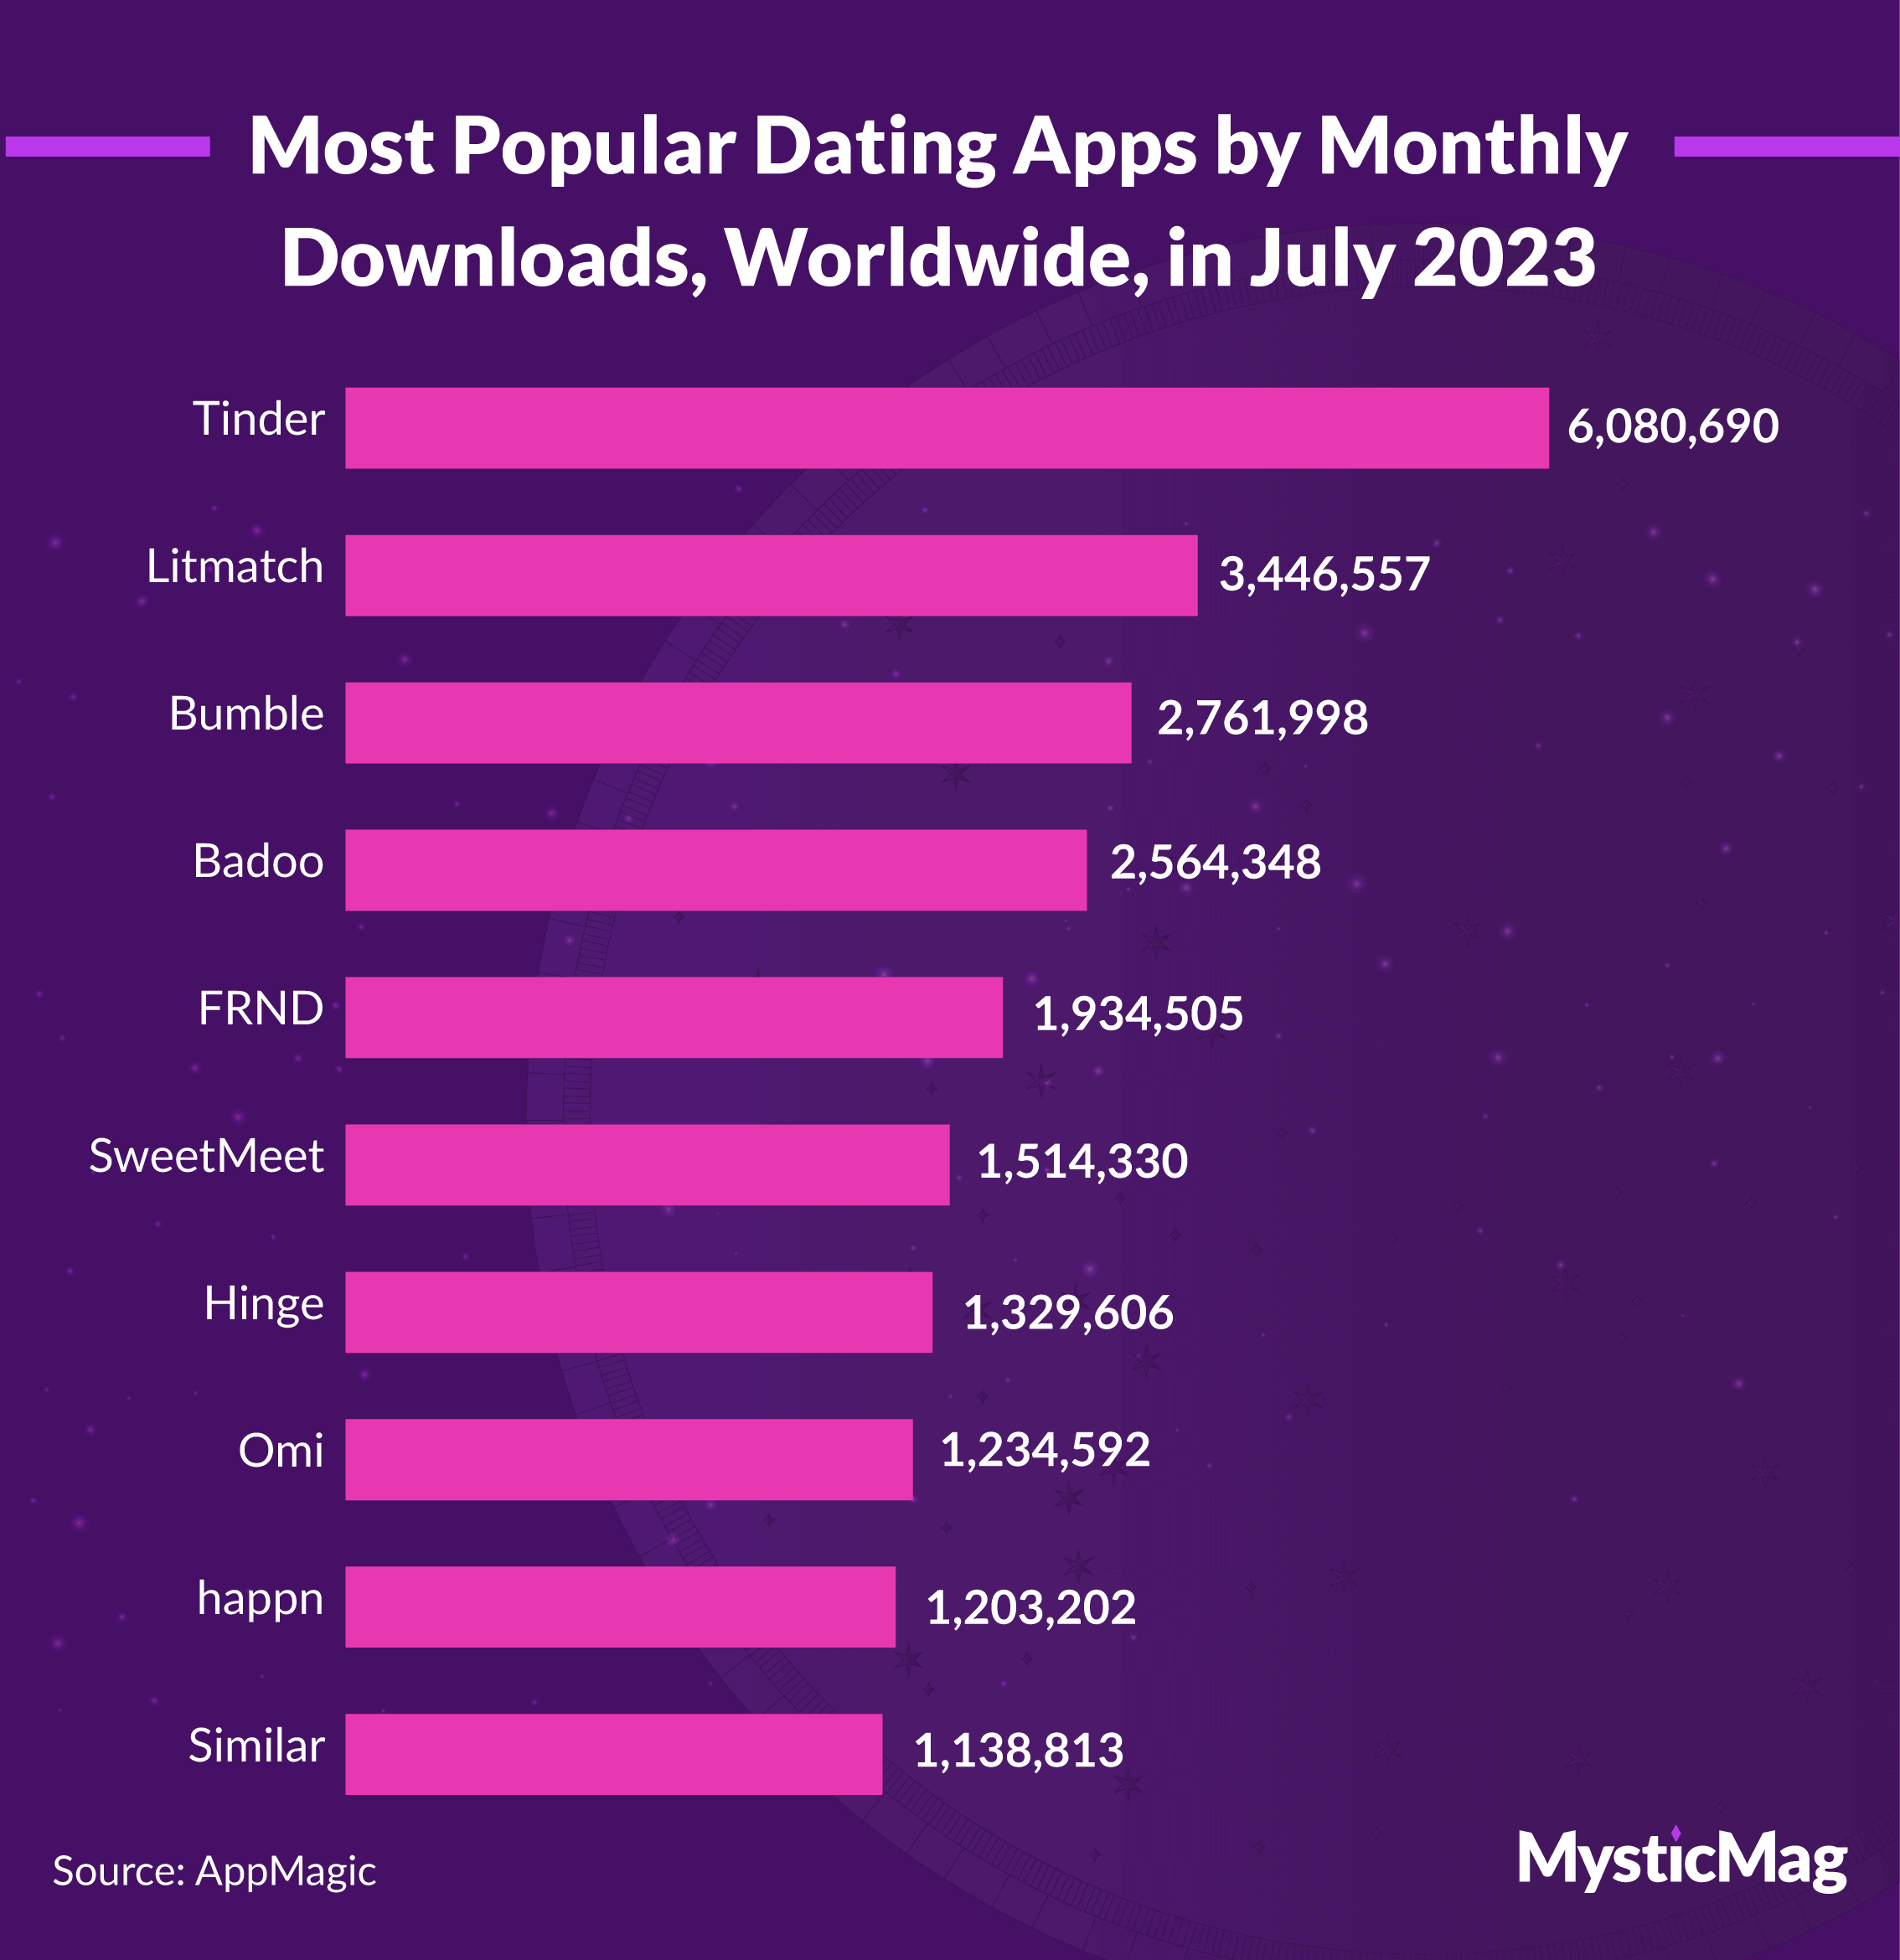 Most downloaded dating apps in July 2023